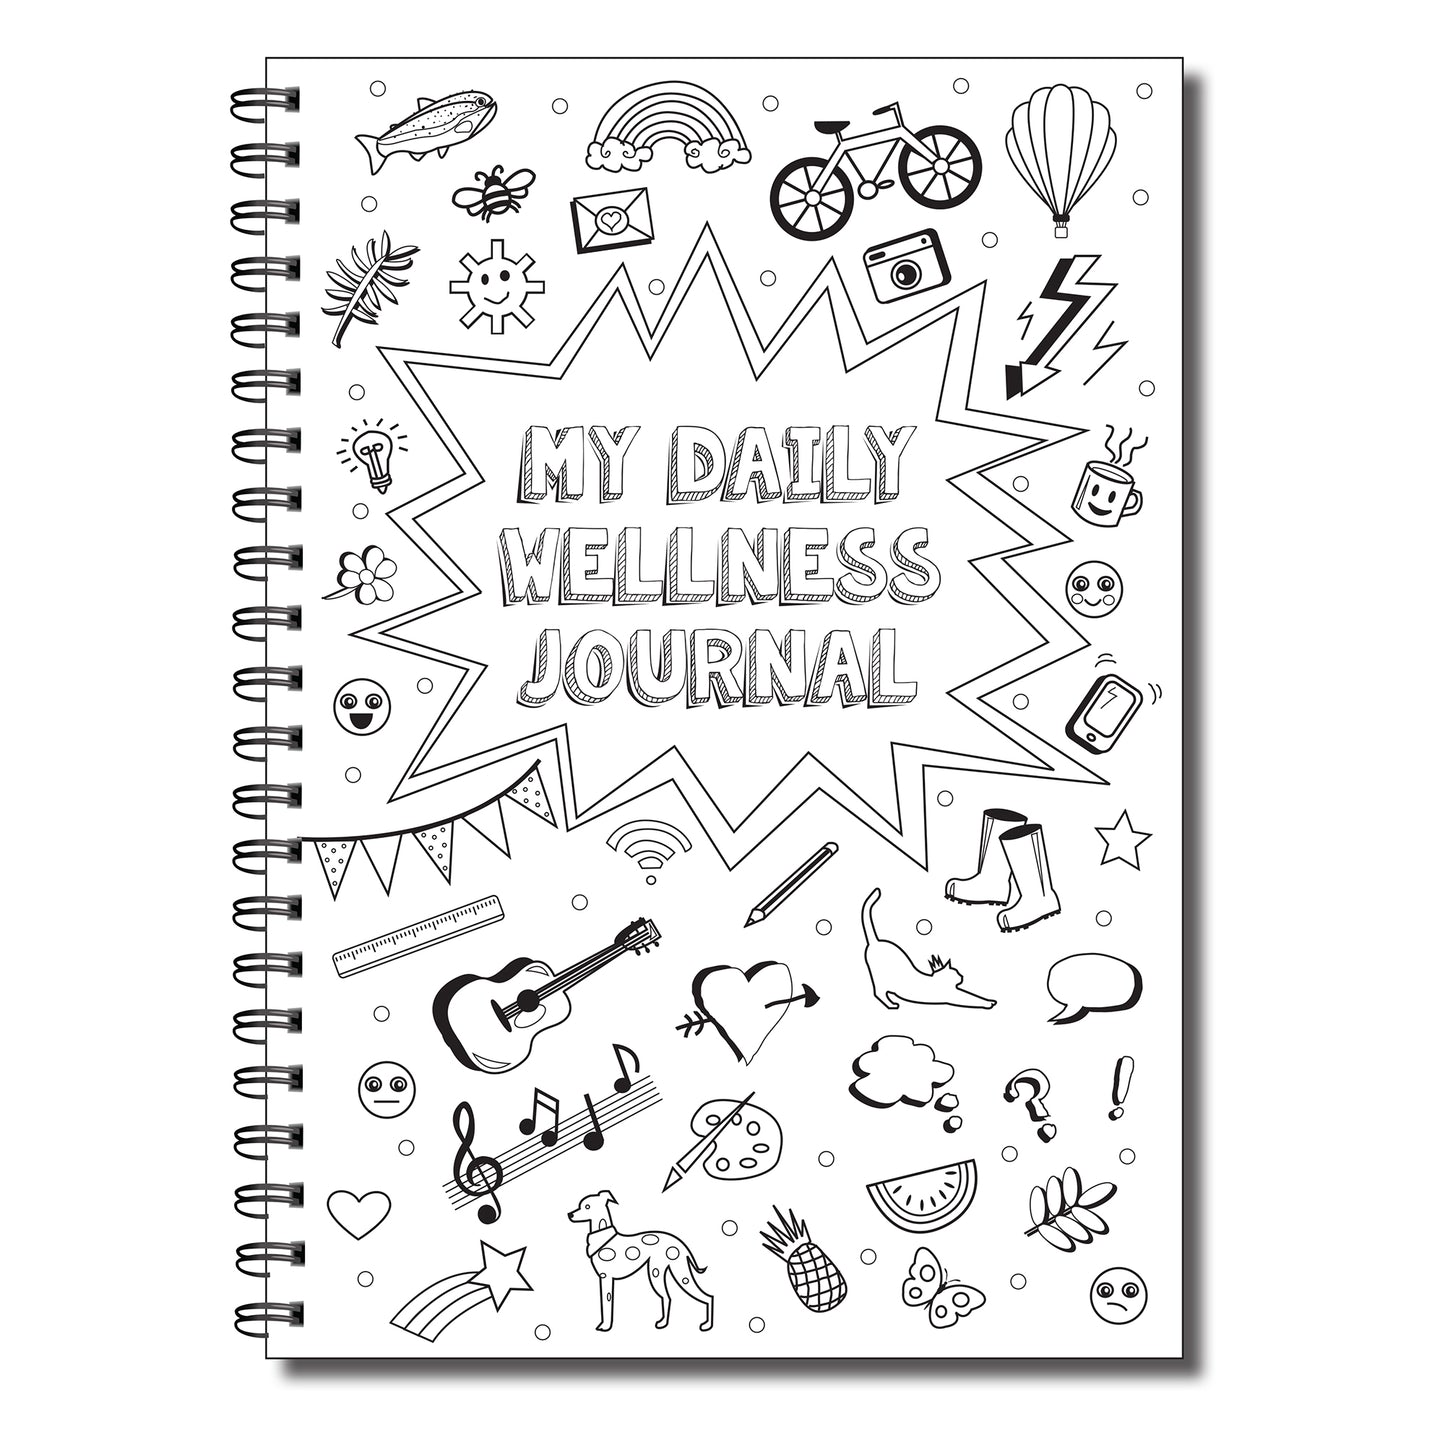 My Daily Wellness Journal | Teens | Adults | Kids | A5 wiro book 50 pages printed to both sides on quality 120gsm